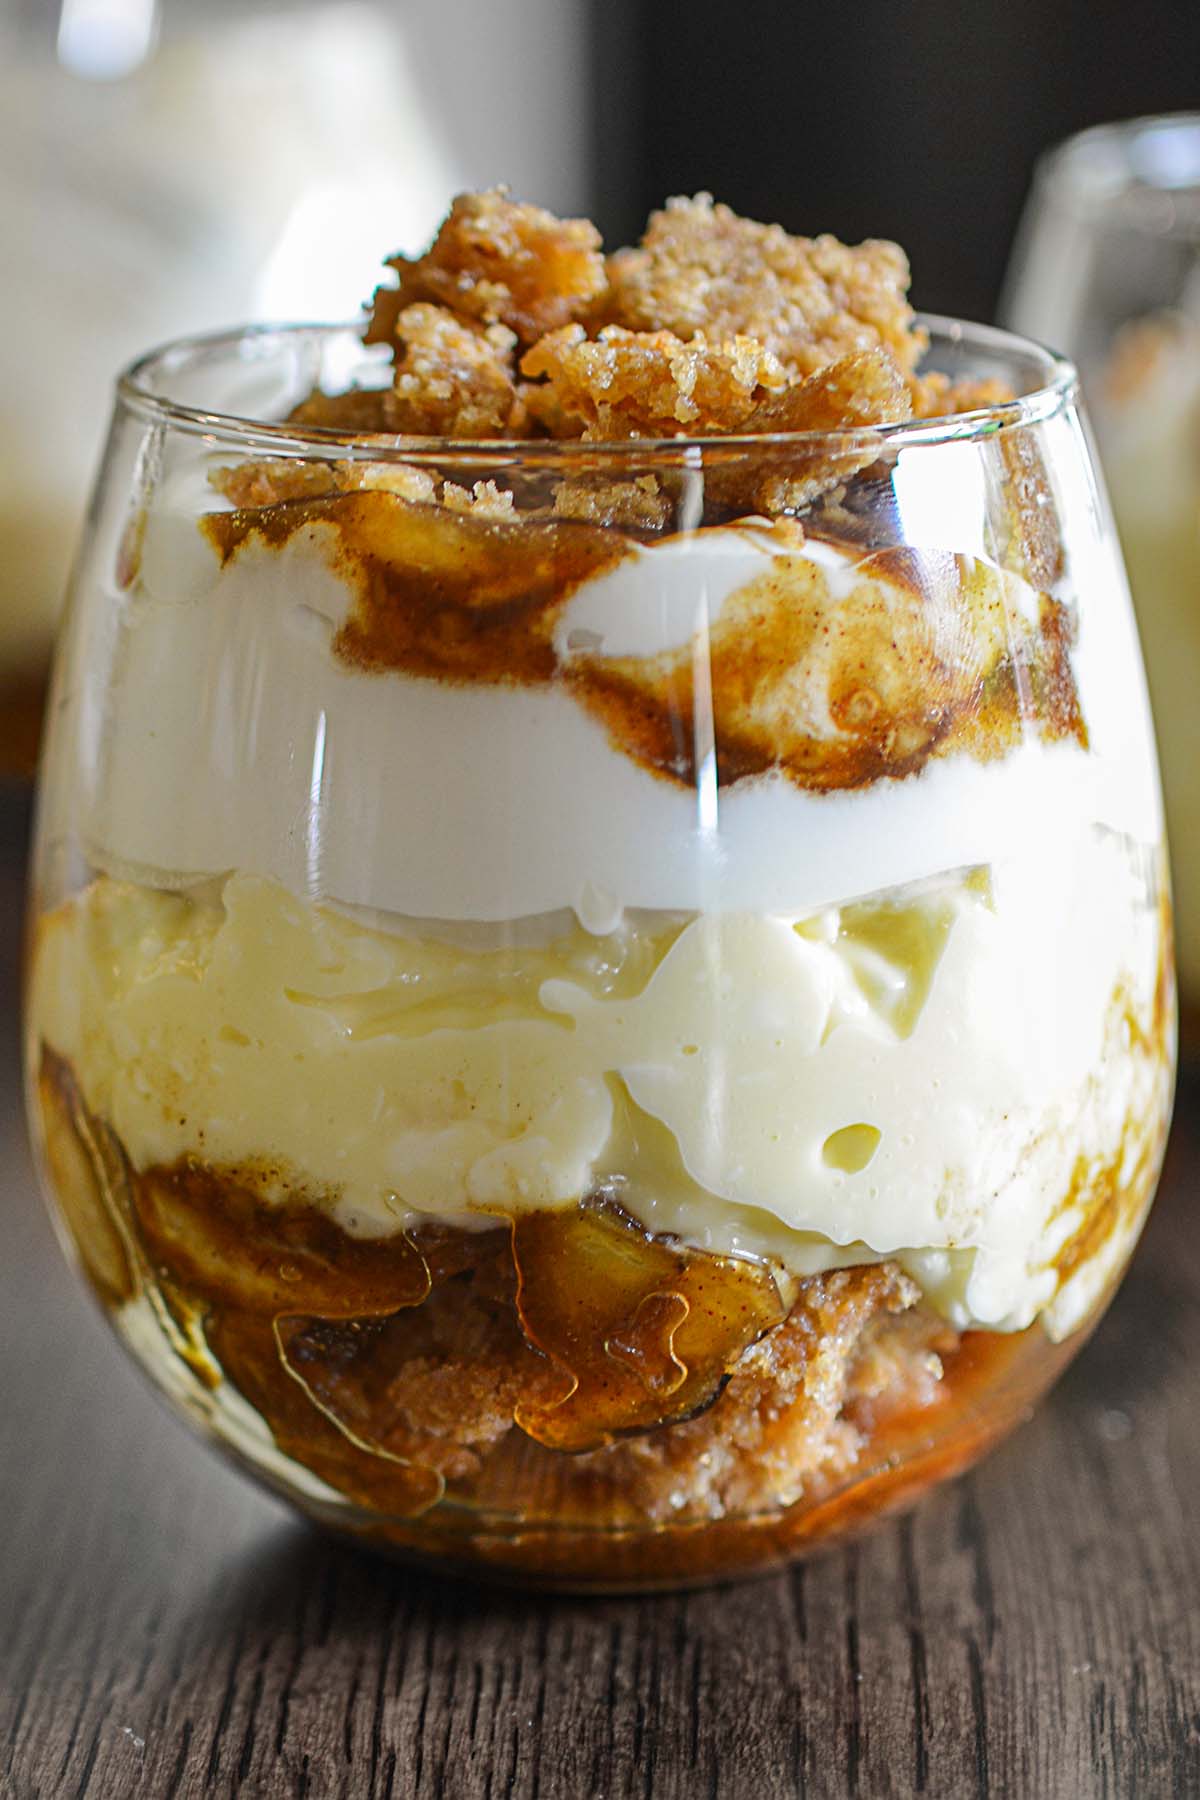 Bananas Foster Banana Pudding served elegantly in a wine glass.